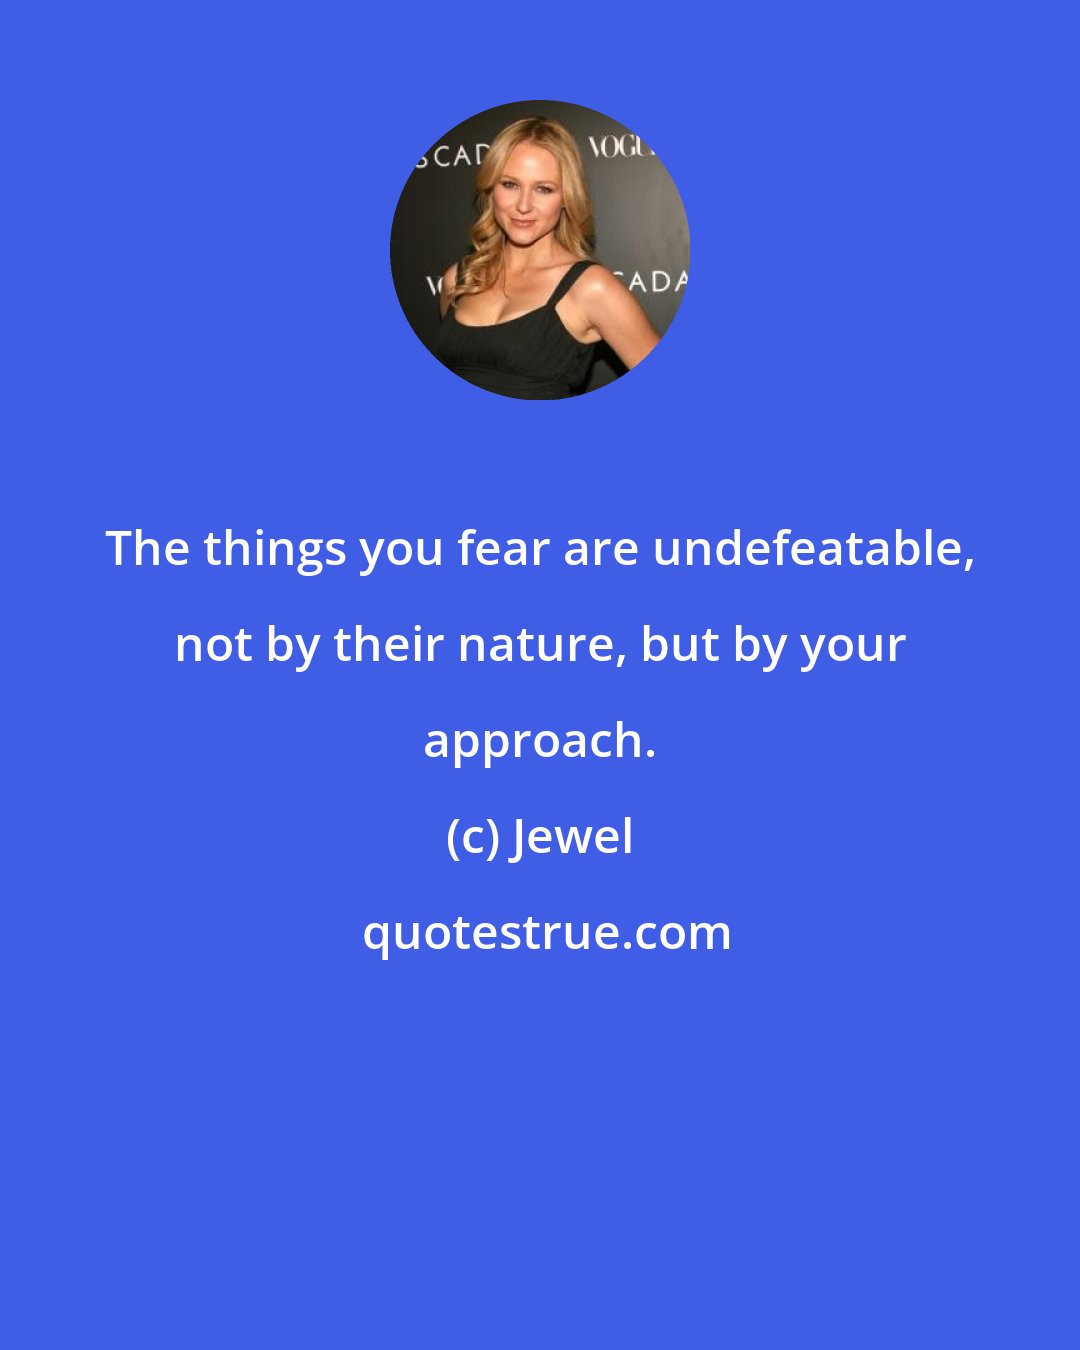 Jewel: The things you fear are undefeatable, not by their nature, but by your approach.